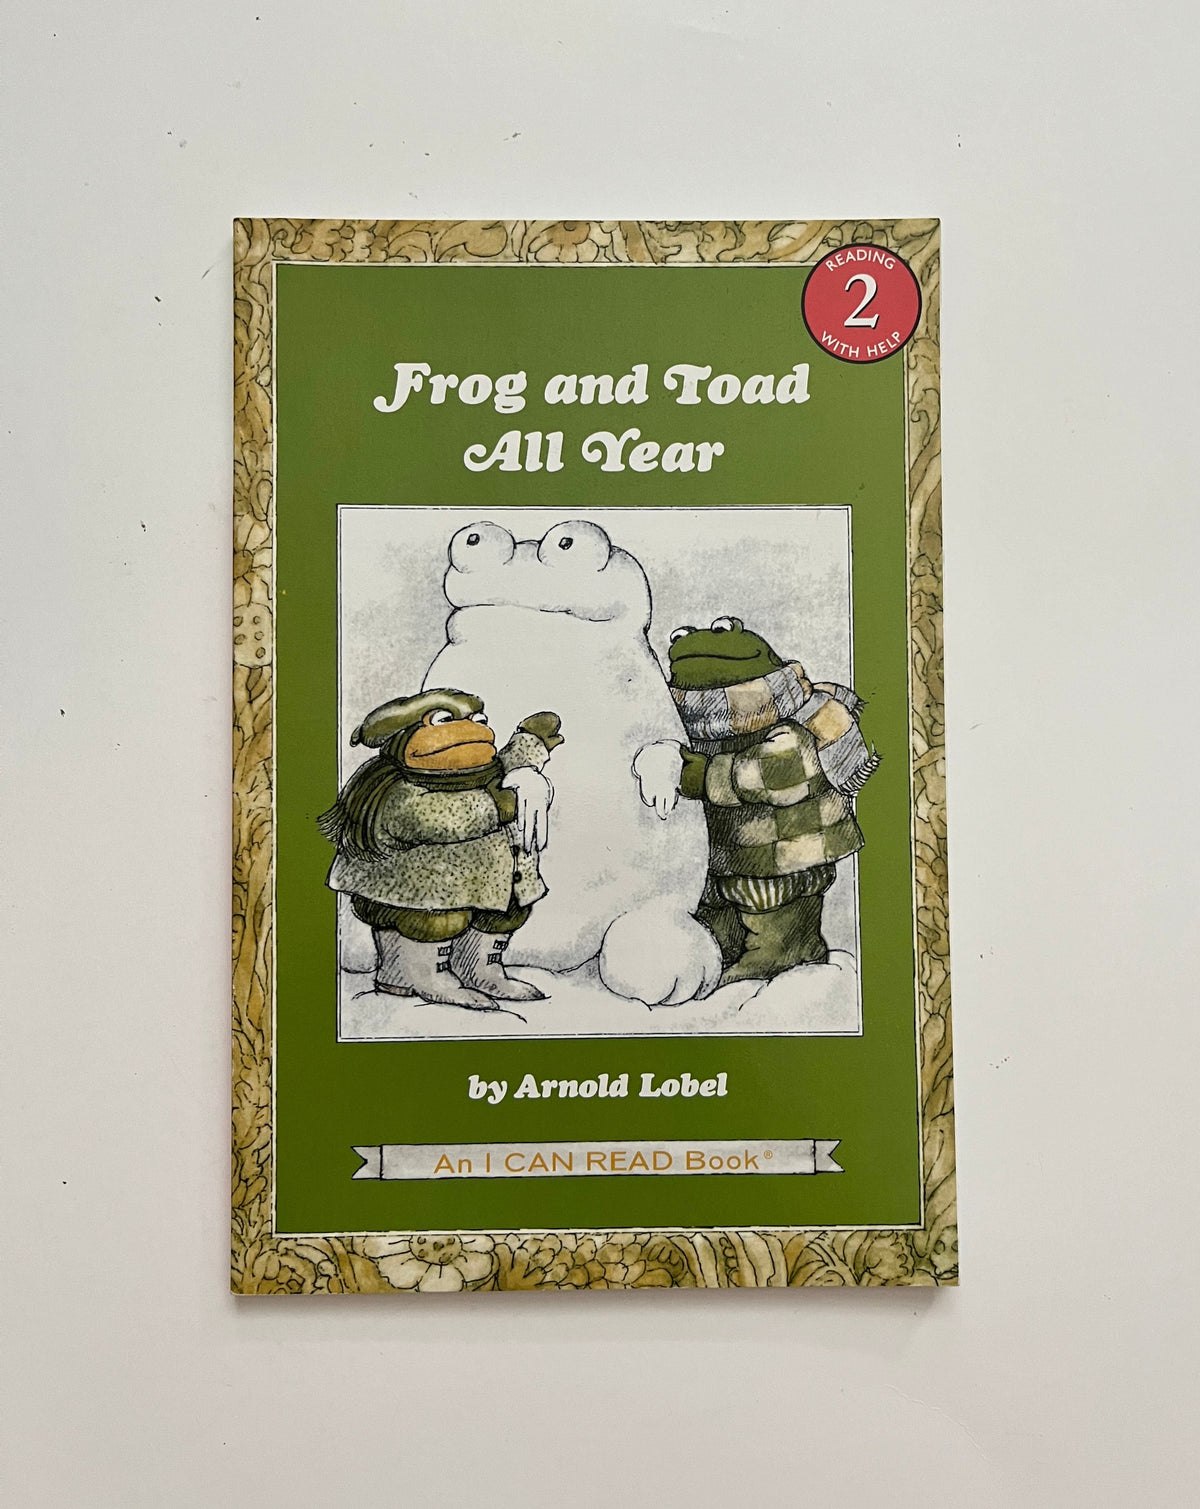 DONATE: Frog and Toad All Year by Arnold Lobel